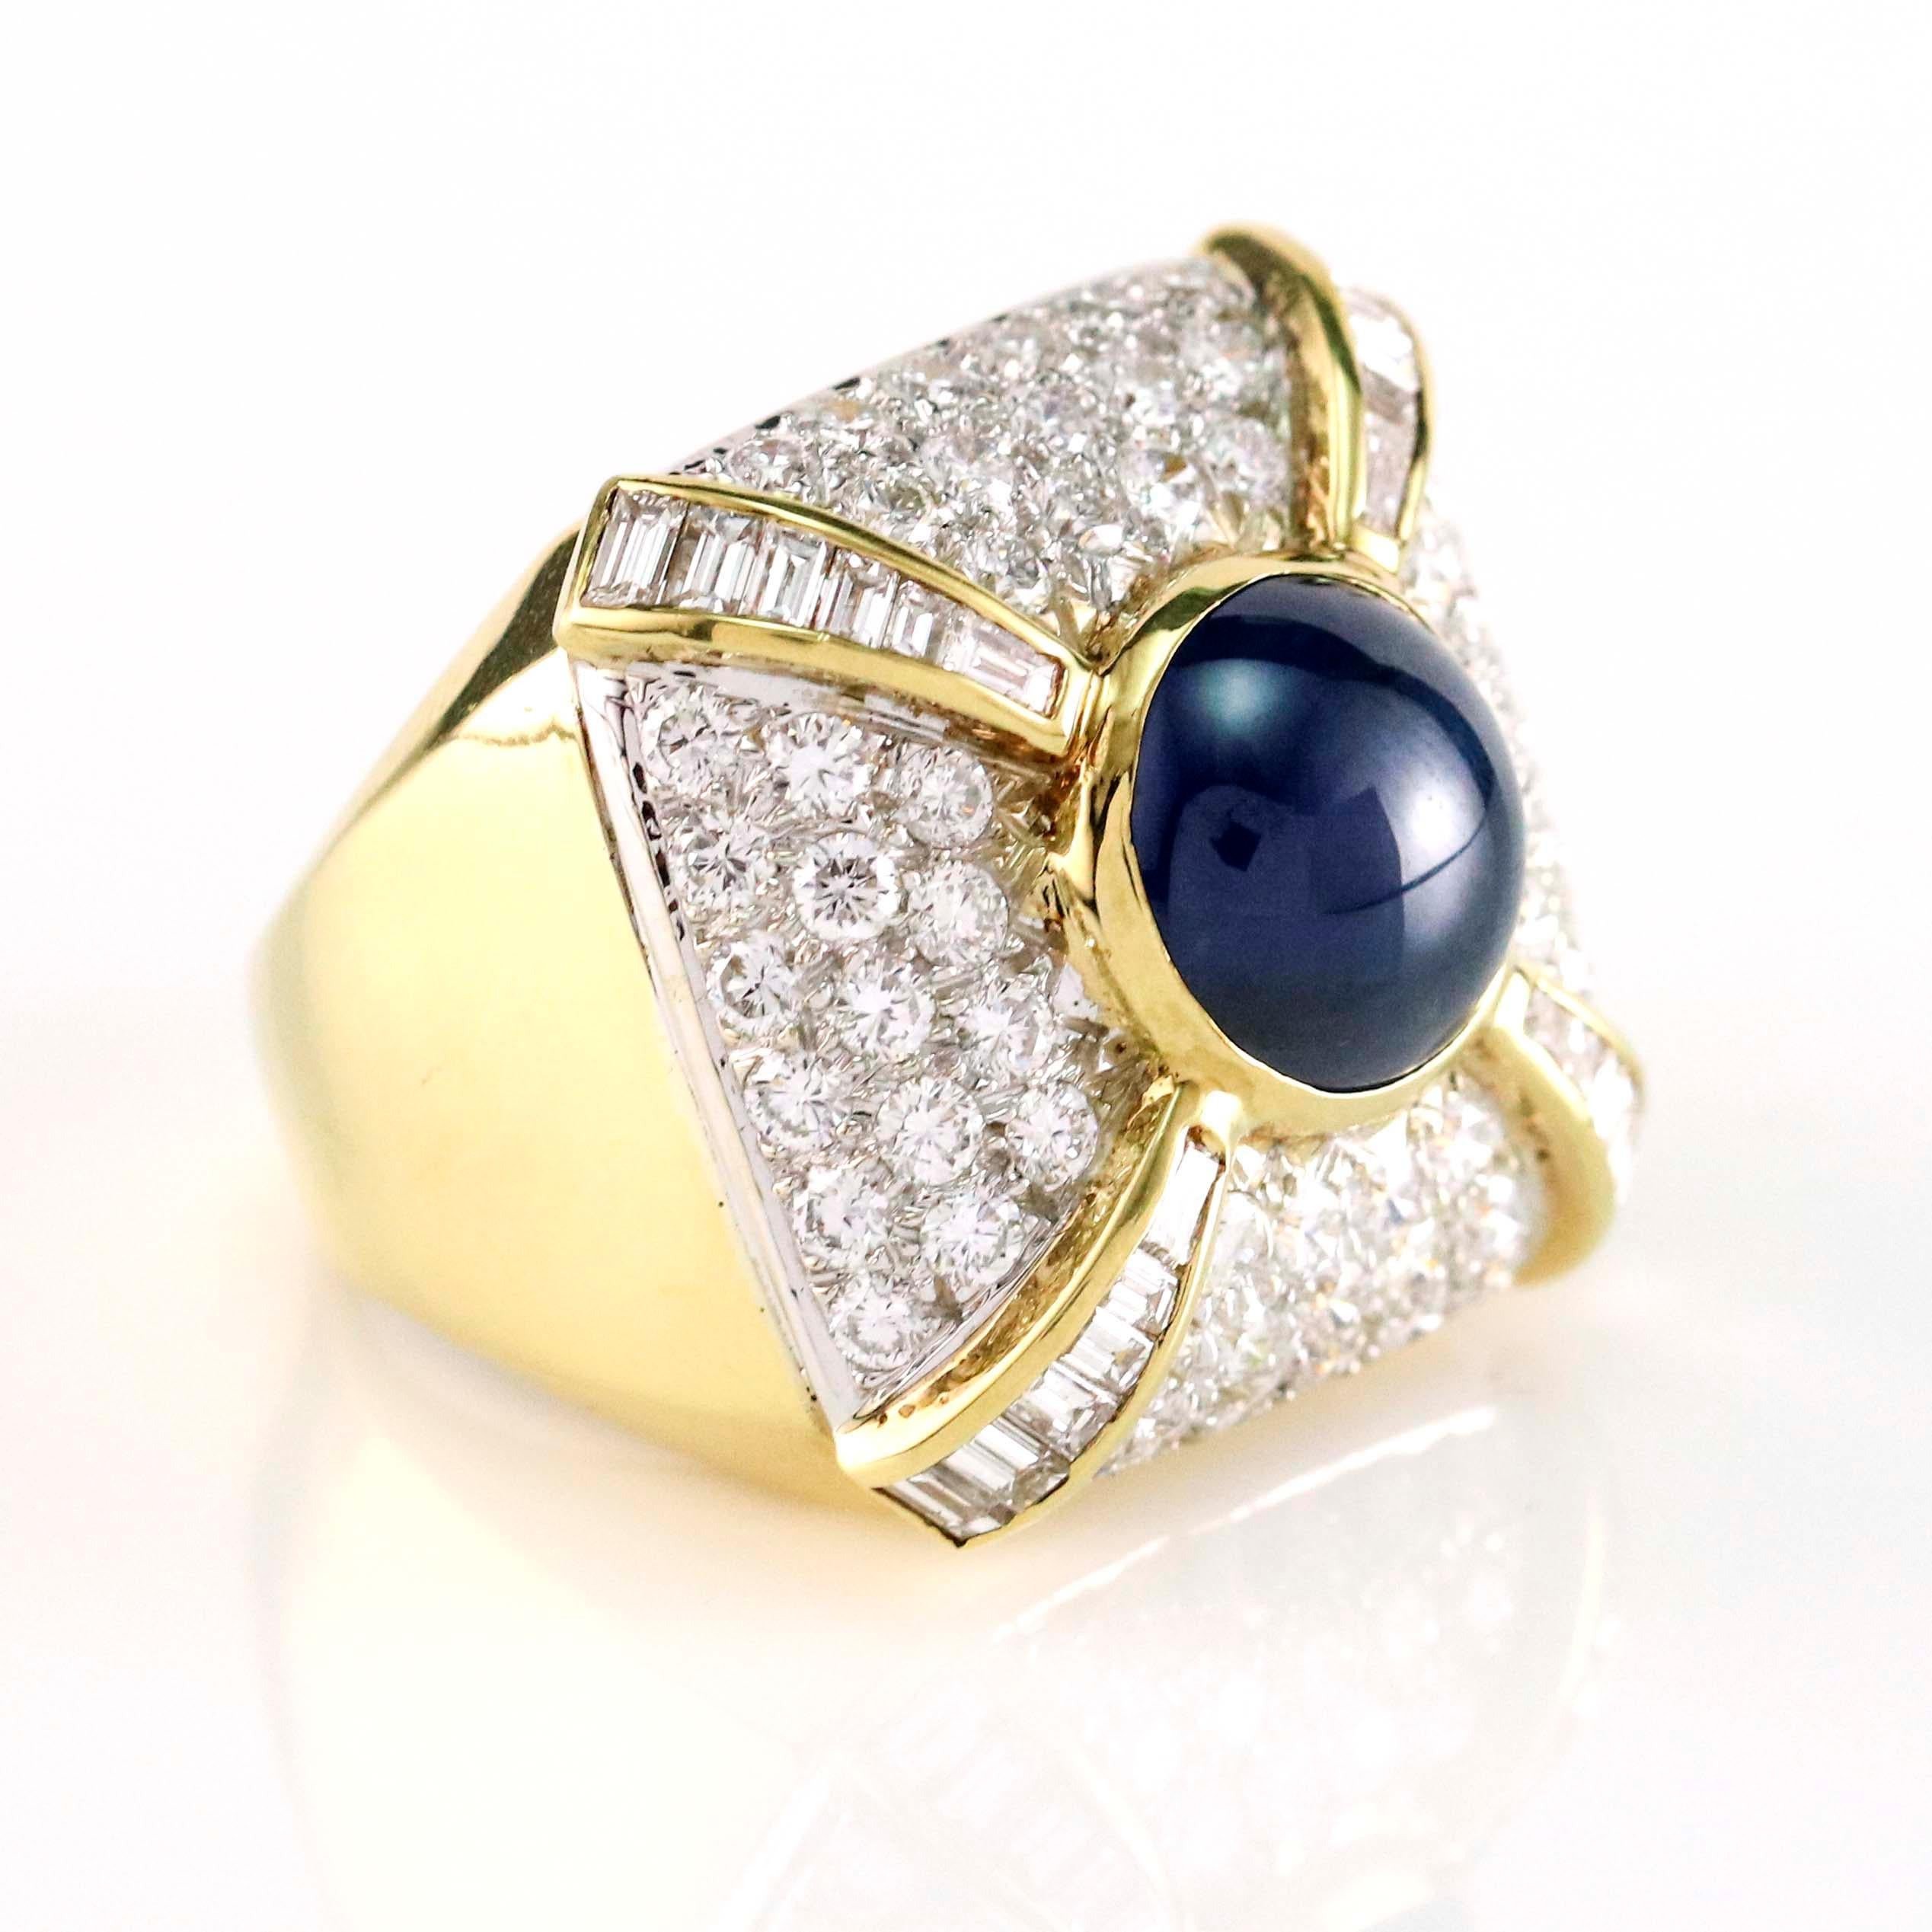 Sapphire and diamond square cocktail ring crafted in 14 karat yellow gold. Size 7. The ring is bead set with 60 full cut diamonds, channel set with 24 baguette cut diamonds, and bezel set with one cabochon cut natural blue sapphire. Total carat